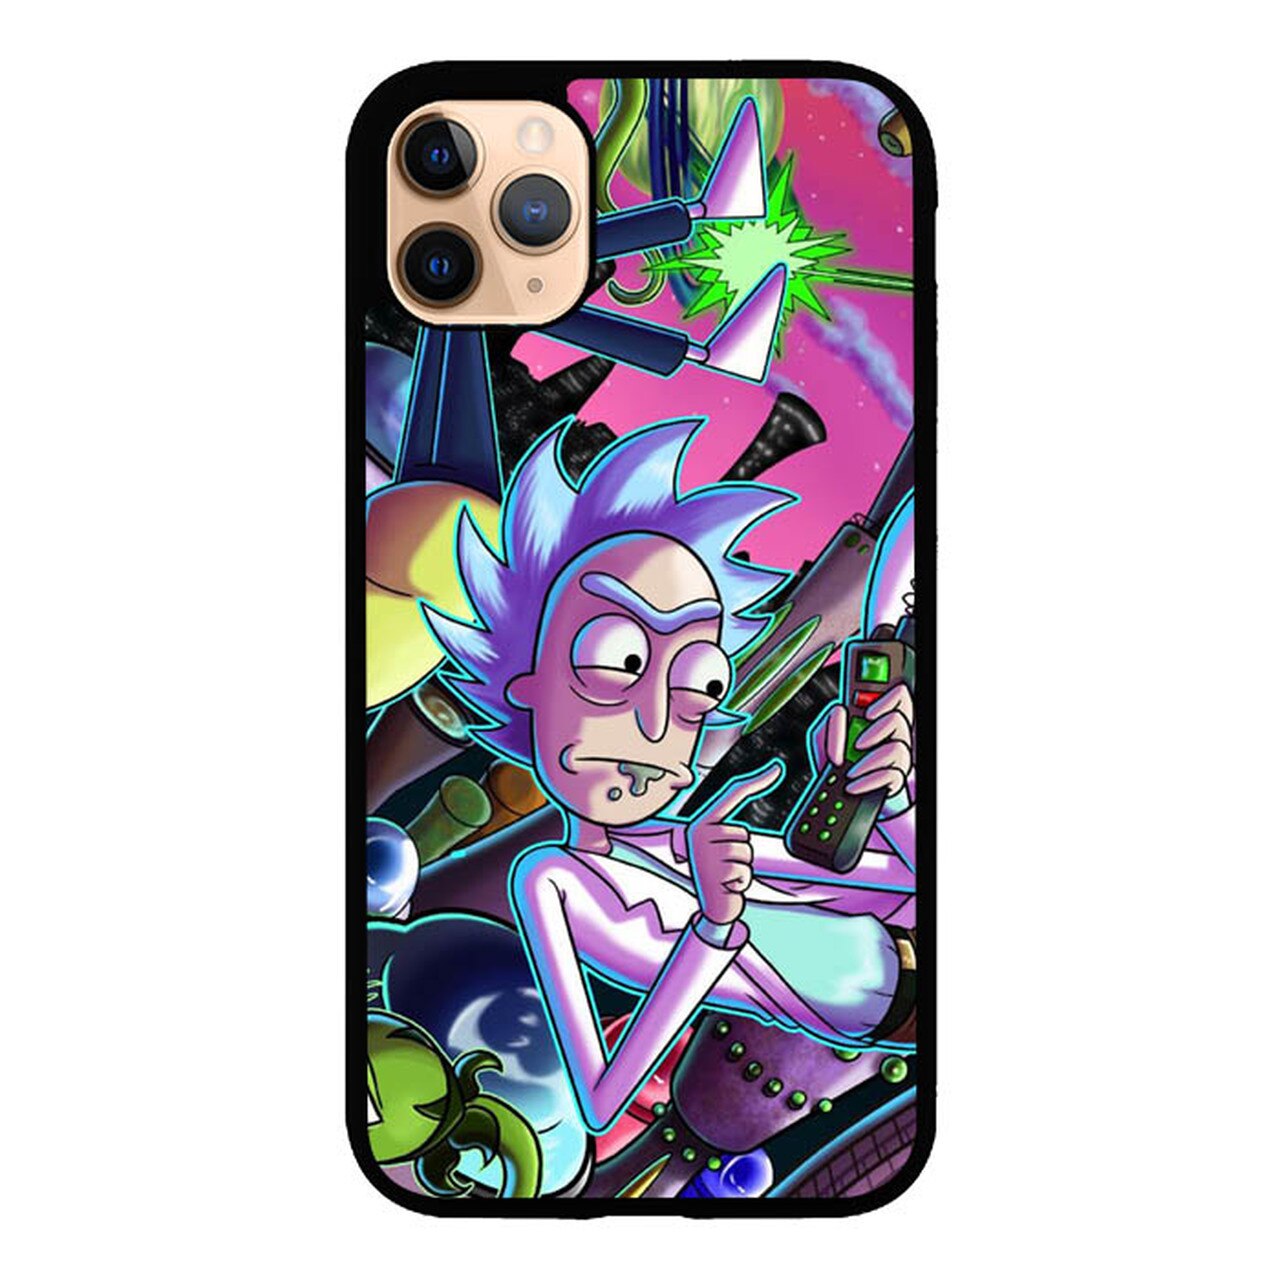 Rick And Morty Iphone 11 Pro Max Case - 1280x1280 Wallpaper 